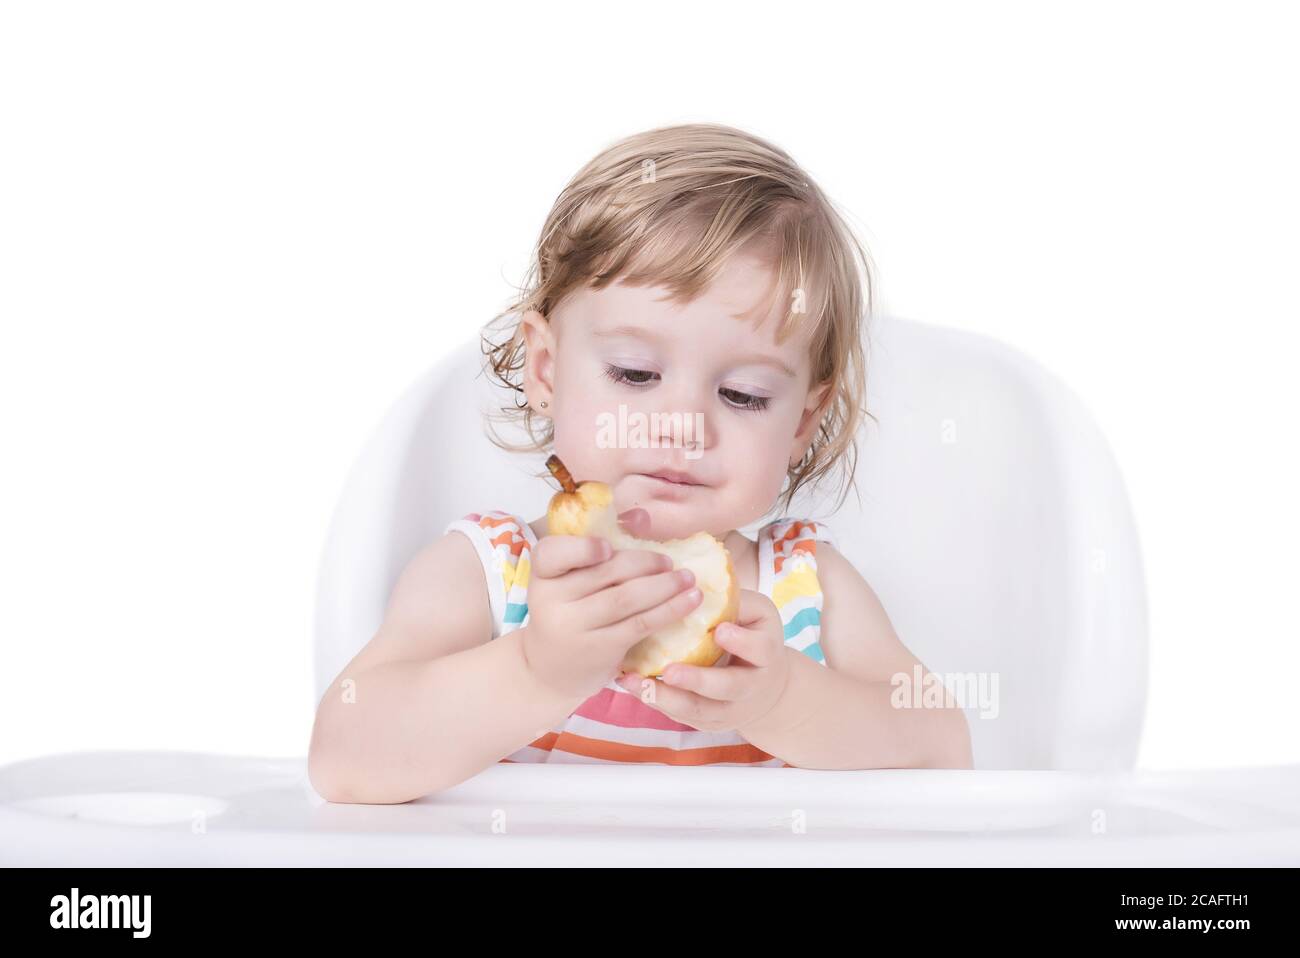 Selective focus shot of a happy little girl eating a pear Stock Photo